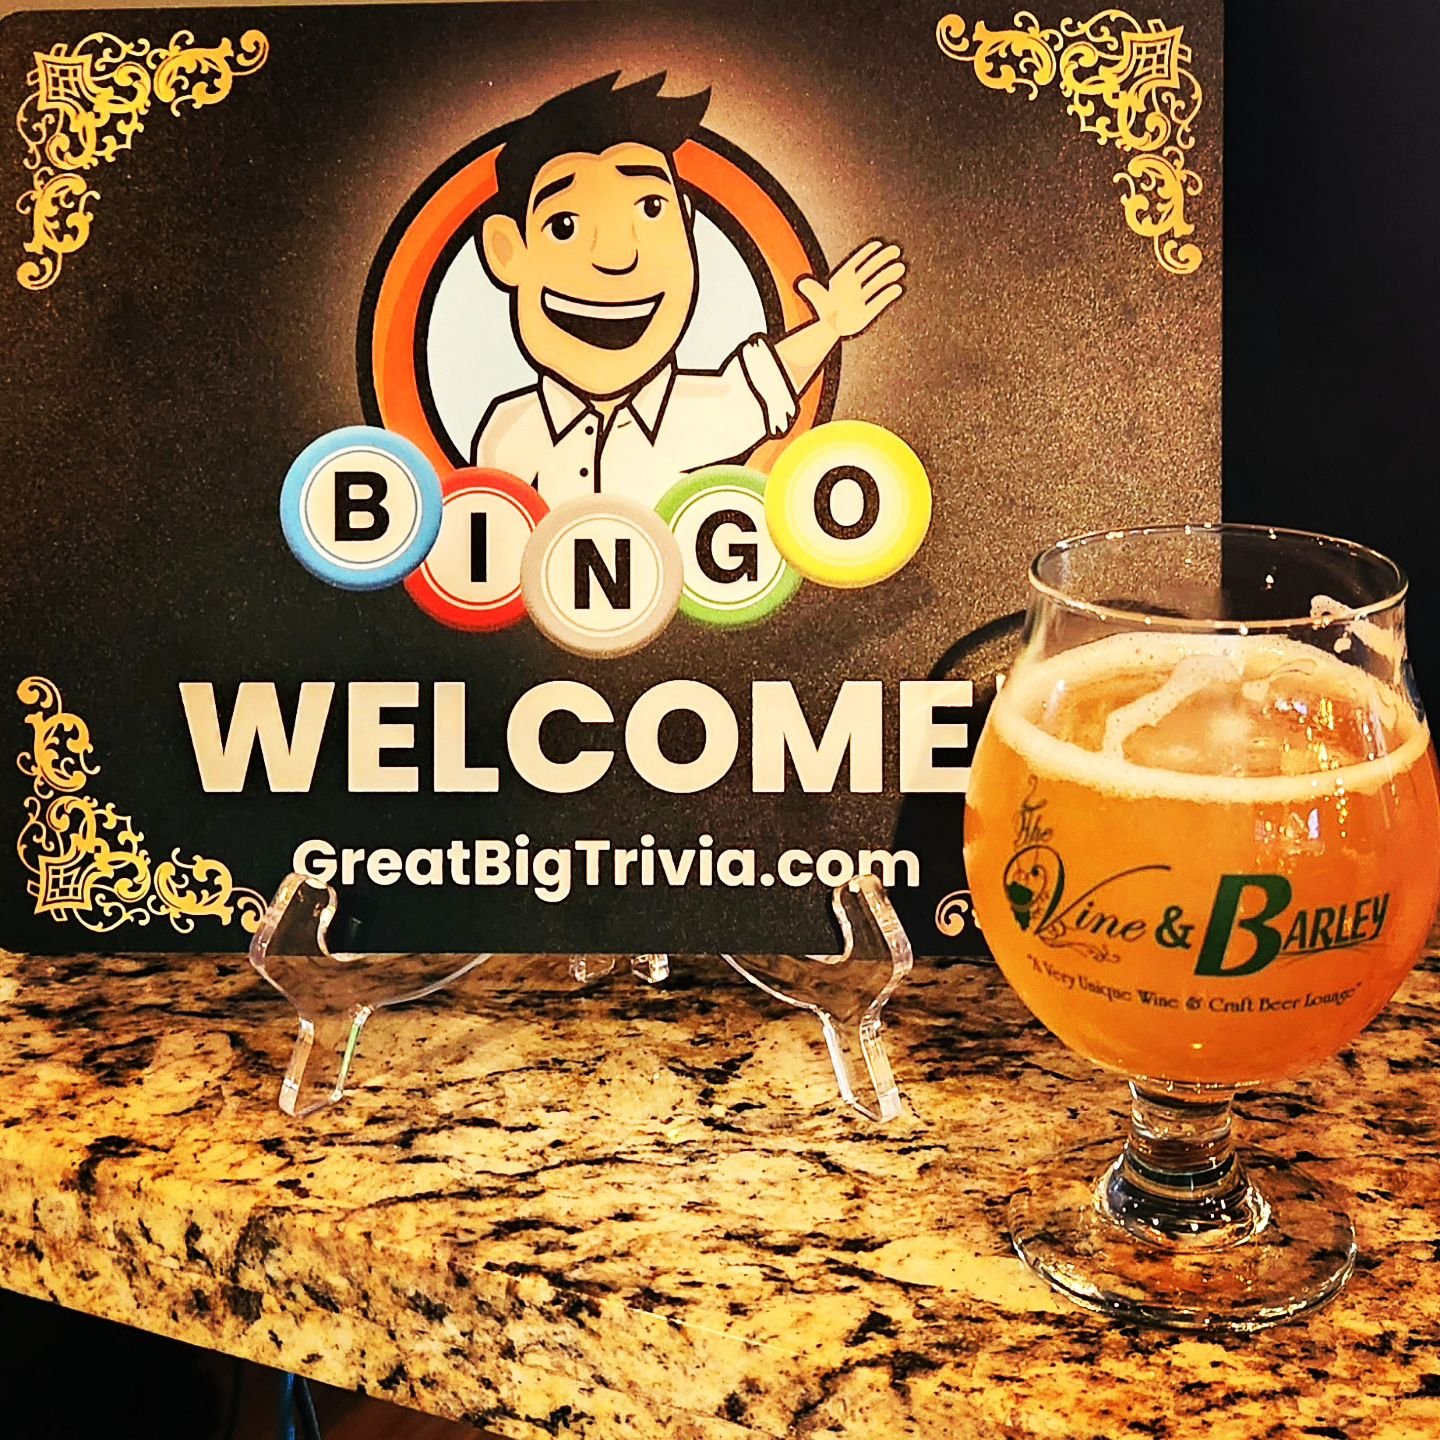 Happy Weekend Friends! Happiest Hours 25% off Beer and Wine until 7 PM followed by @greatbigtrivia Music Bingo at 7 PM! Hope to see your beautiful faces! #VineandBarley #MusicBingo #PortStLucie #Saturday #greatbigtrivia #craftbeer #WineDownWeekend